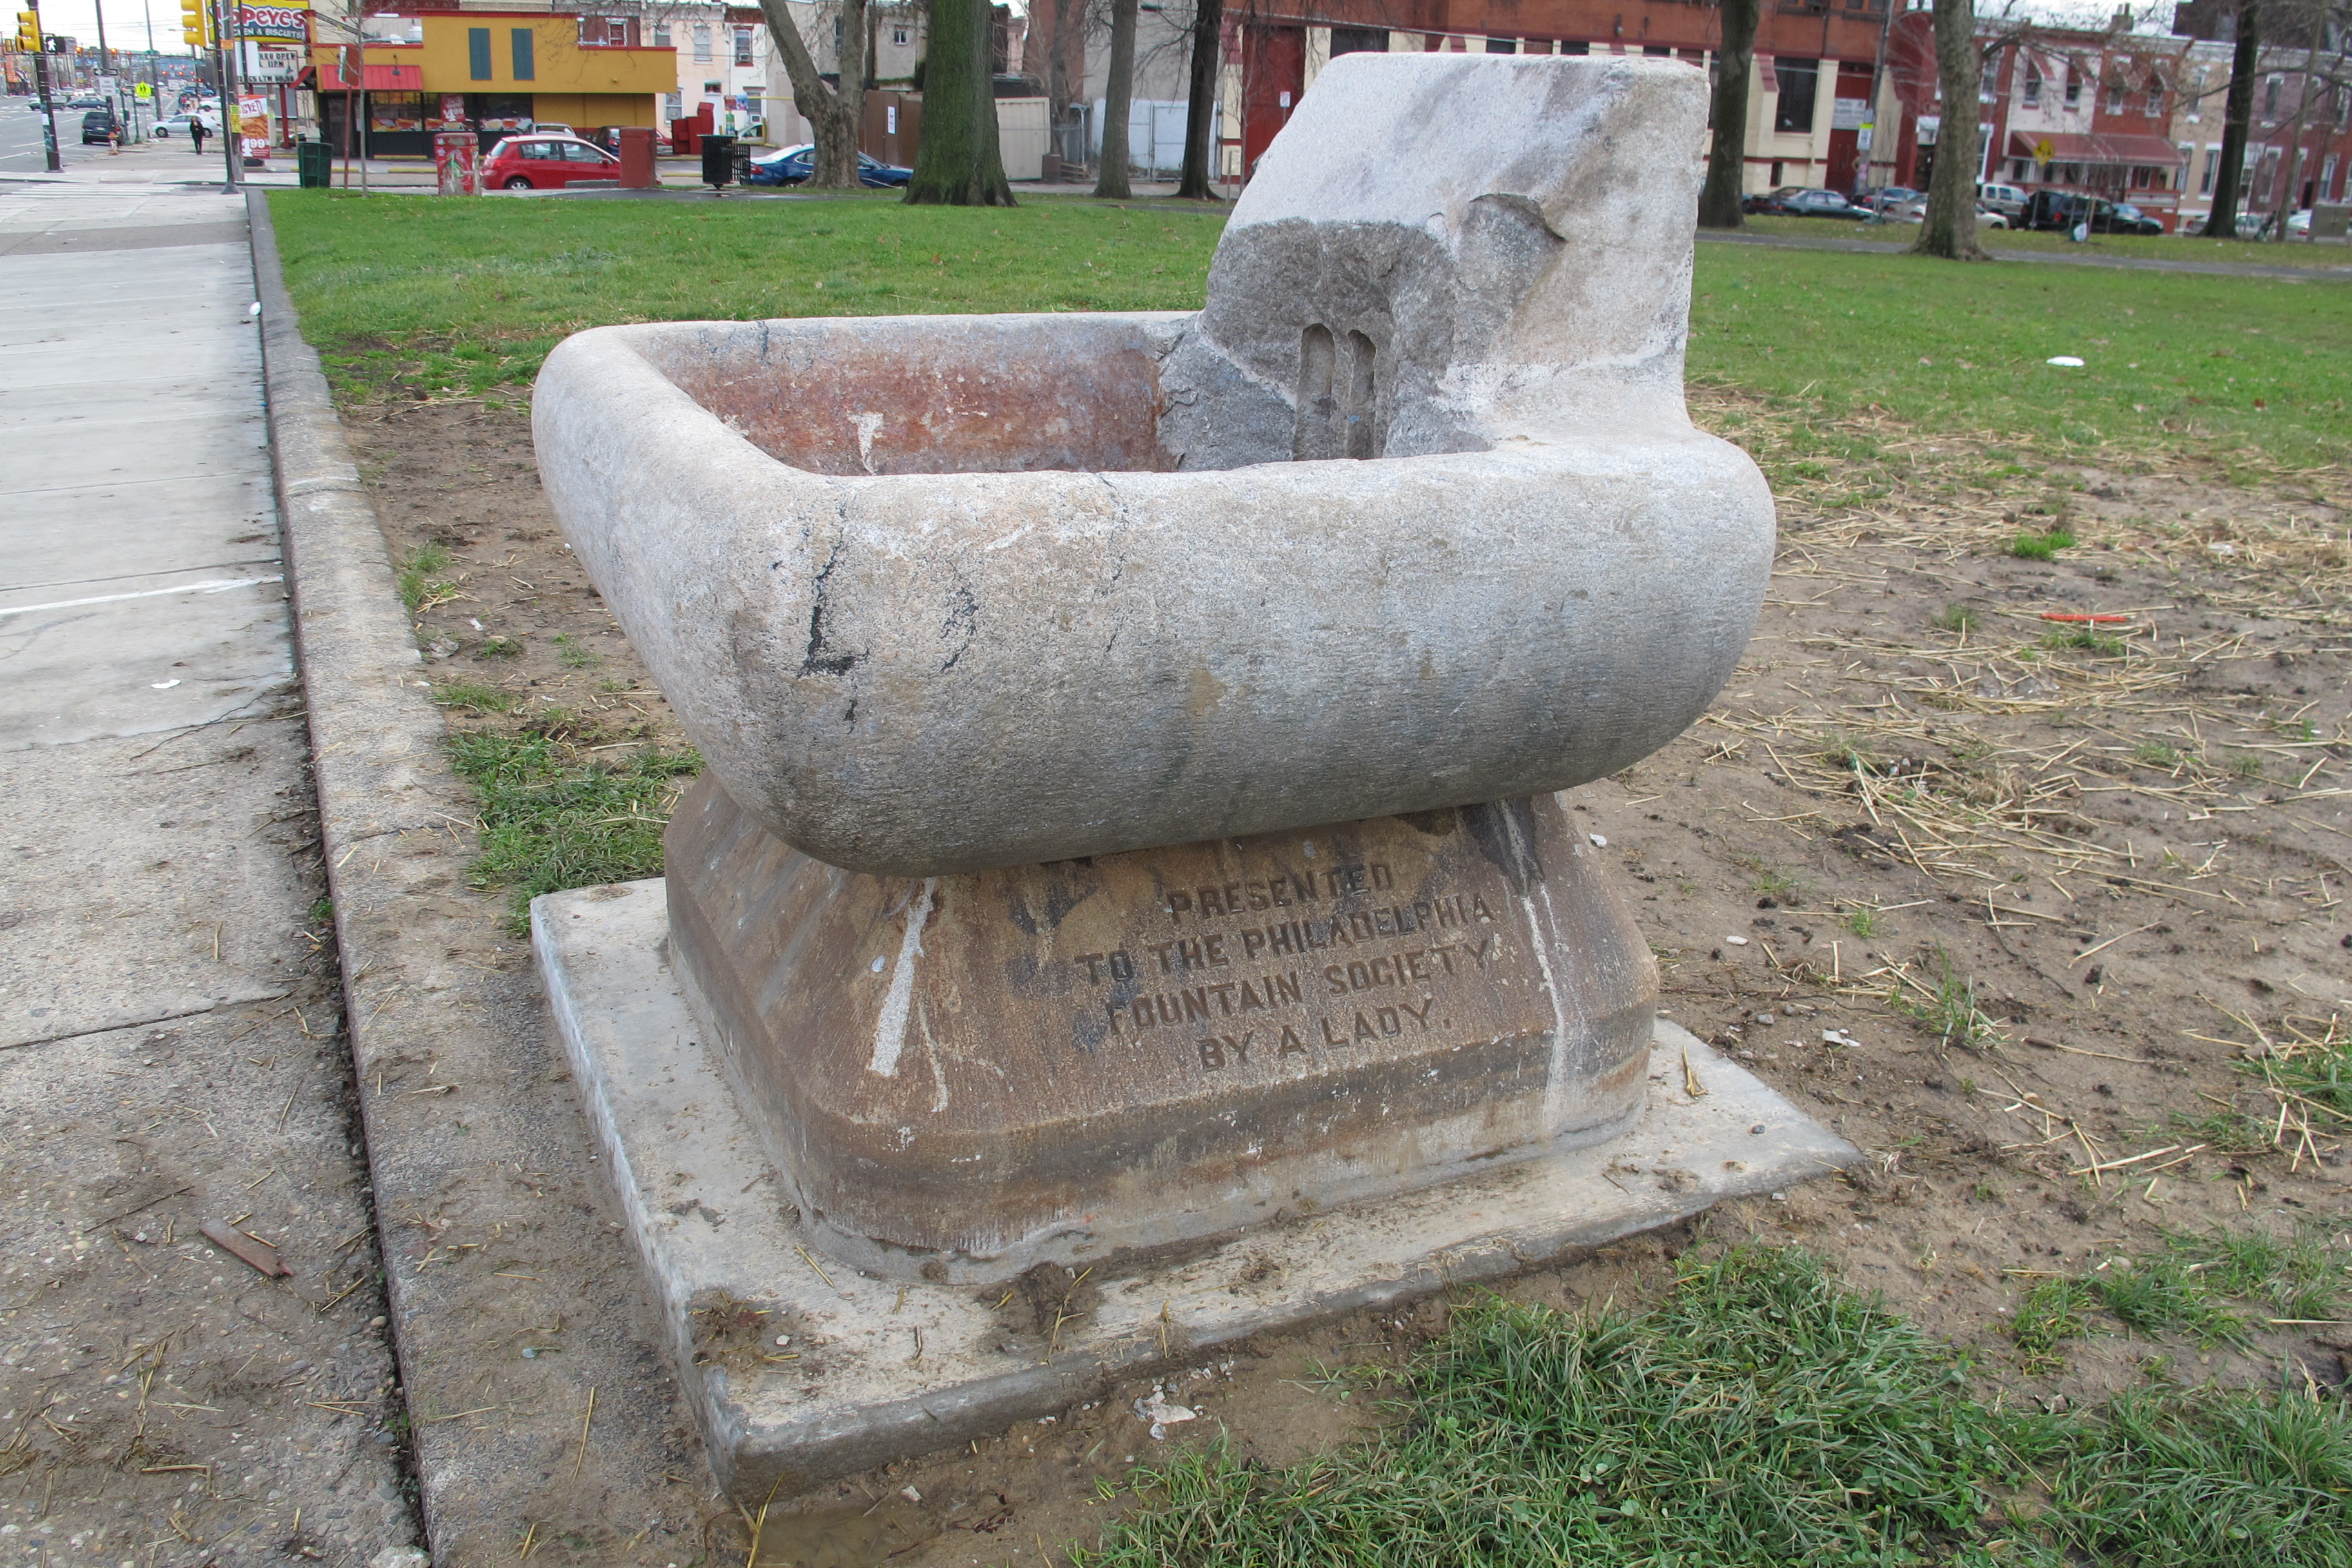 Presented to the Philadelphia Fountain Society by a Lady reads the inscription on this trough at the edge of Fairhill Square. One Mrs. Forpaugh donated funds in 1895 for this trough.